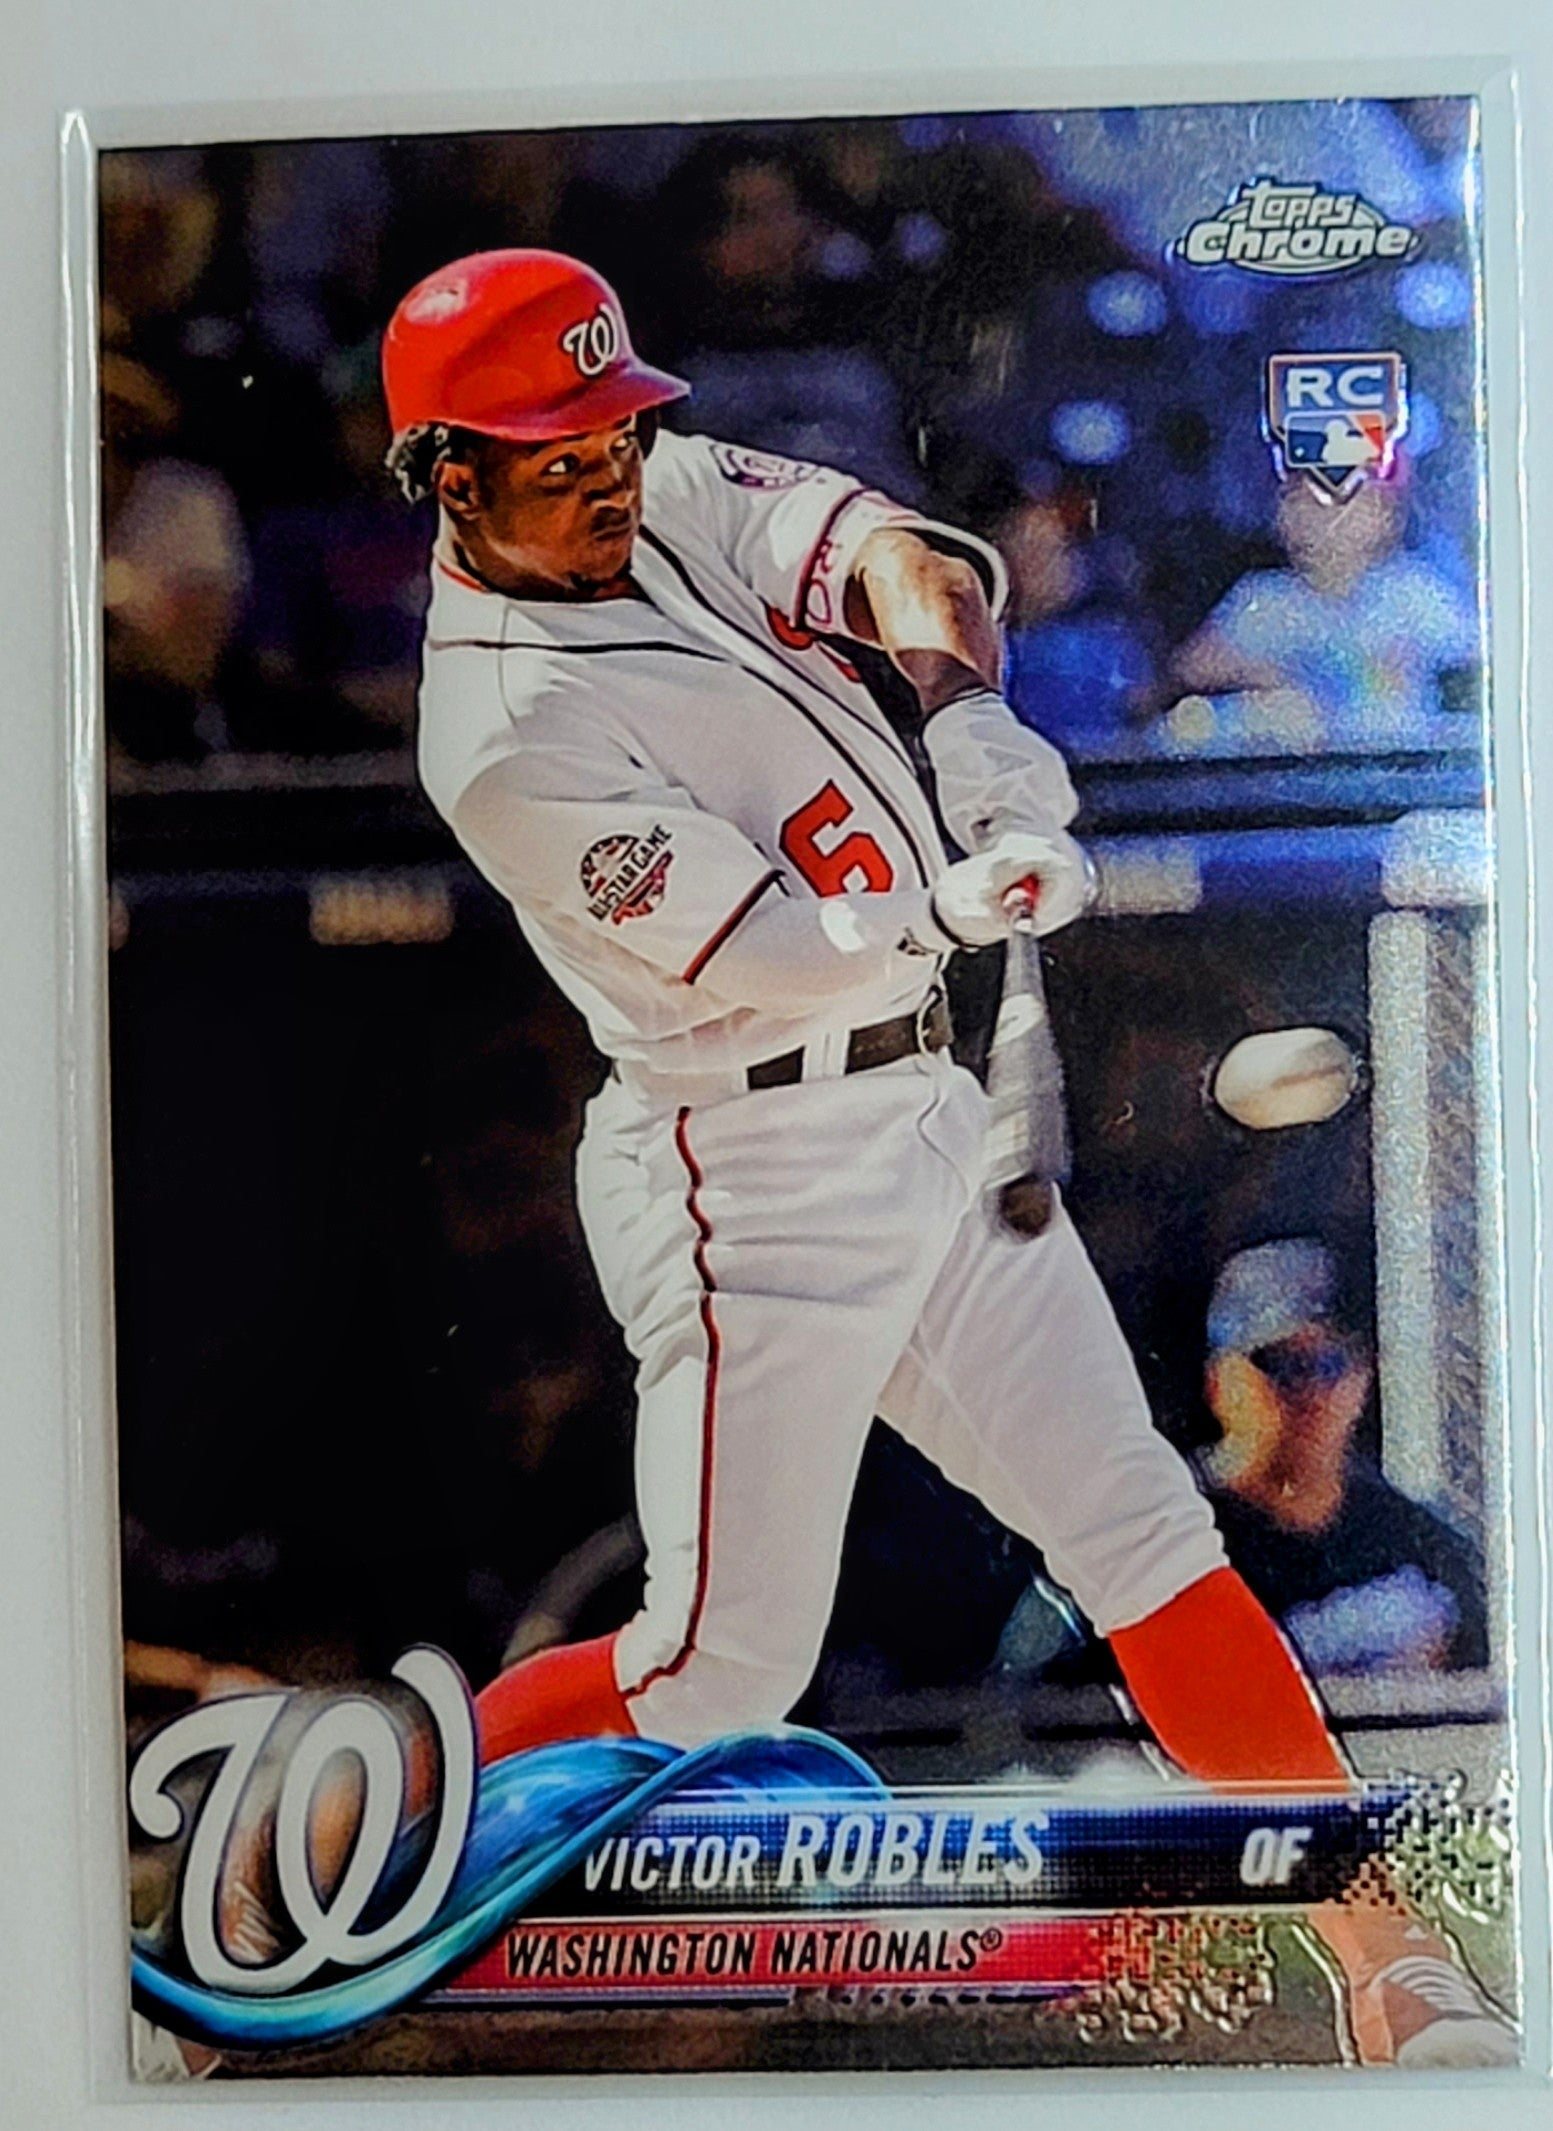 2018 Topps Chrome Update
  Edition Victor Robles   RC Washington
  Nationals Baseball Card TH1C4 simple Xclusive Collectibles   